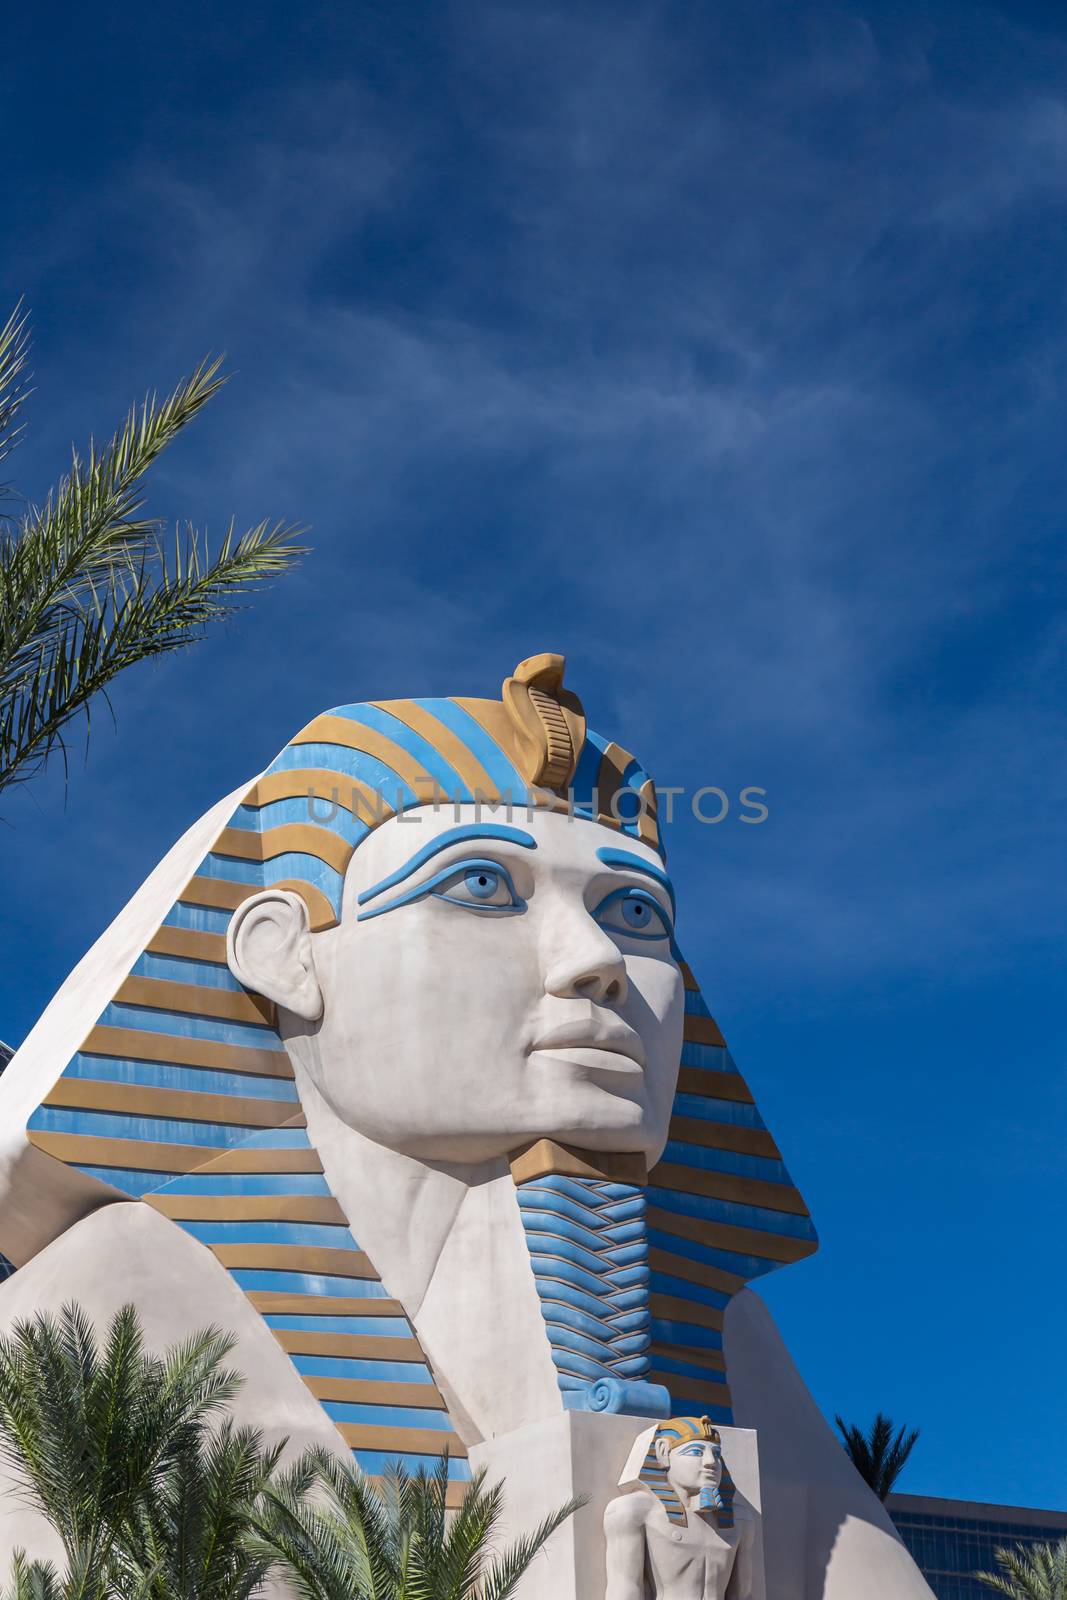 The Great Sphinx of Giza at Luxor Las Vegas by wolterk